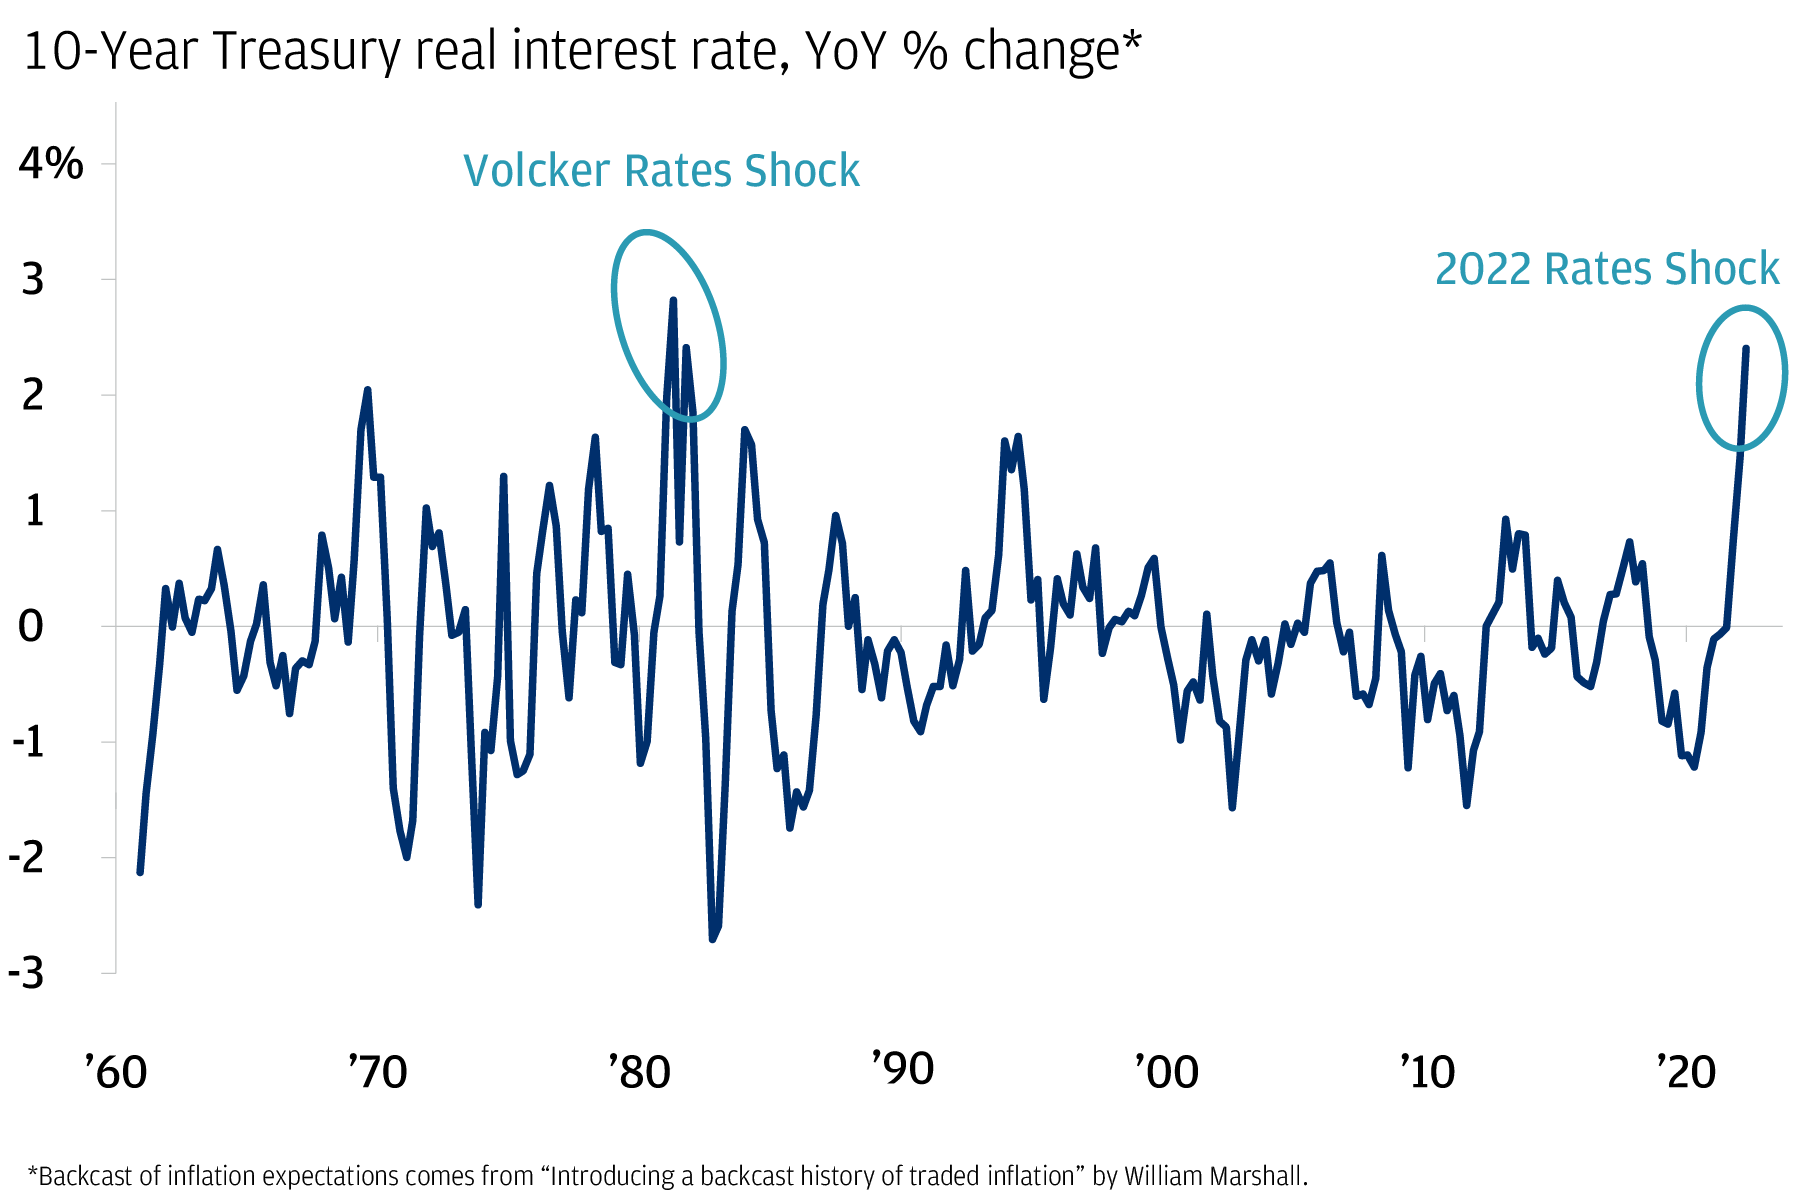 This chart shows the YoY percent change of 10-year real interest rate since January 1960. 